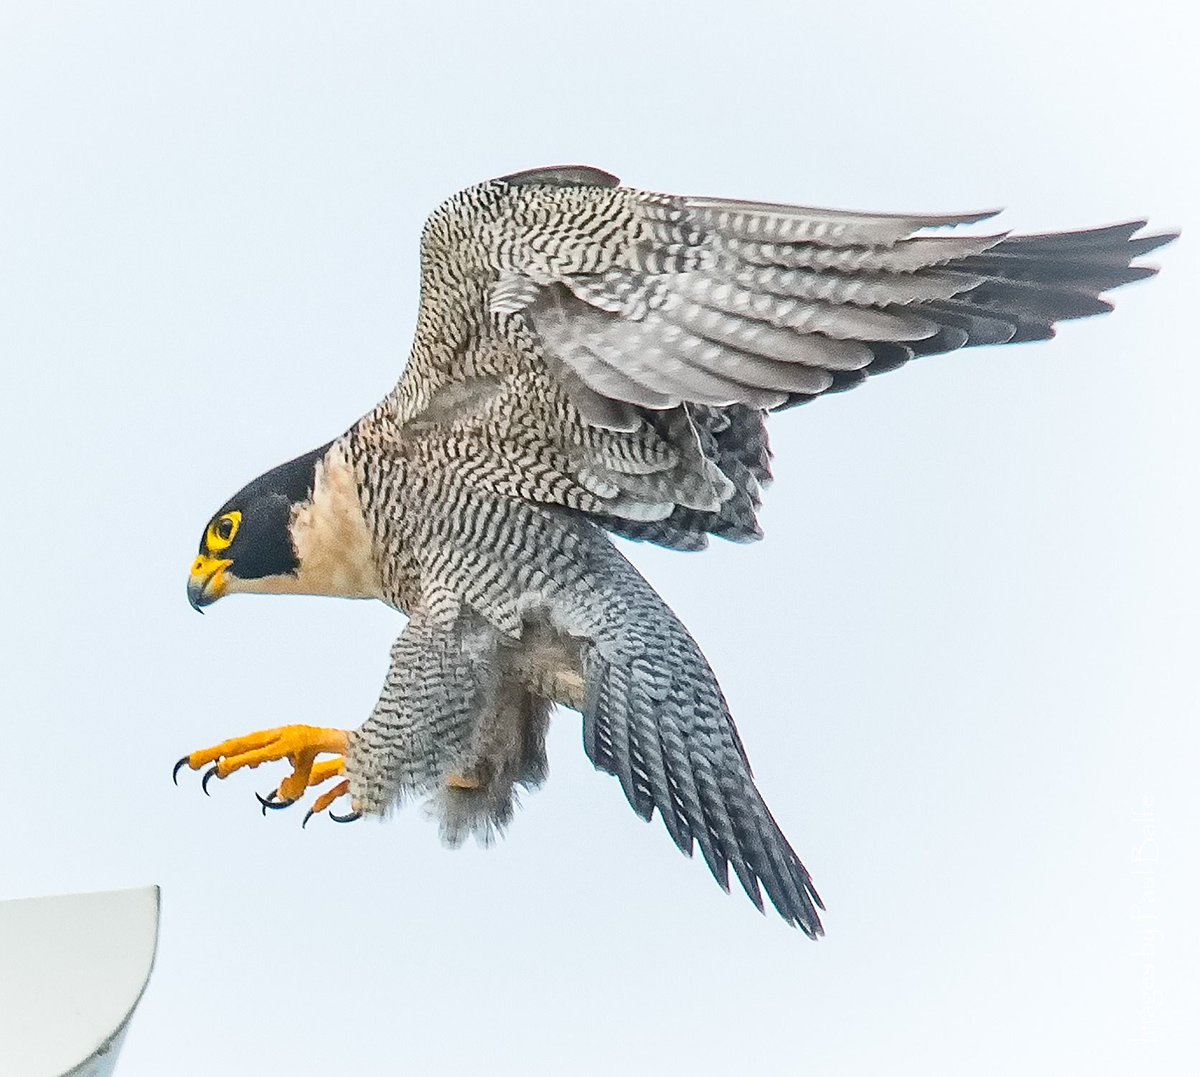 peregrine falconpollution and persecution controlincredible they nest in many cities!